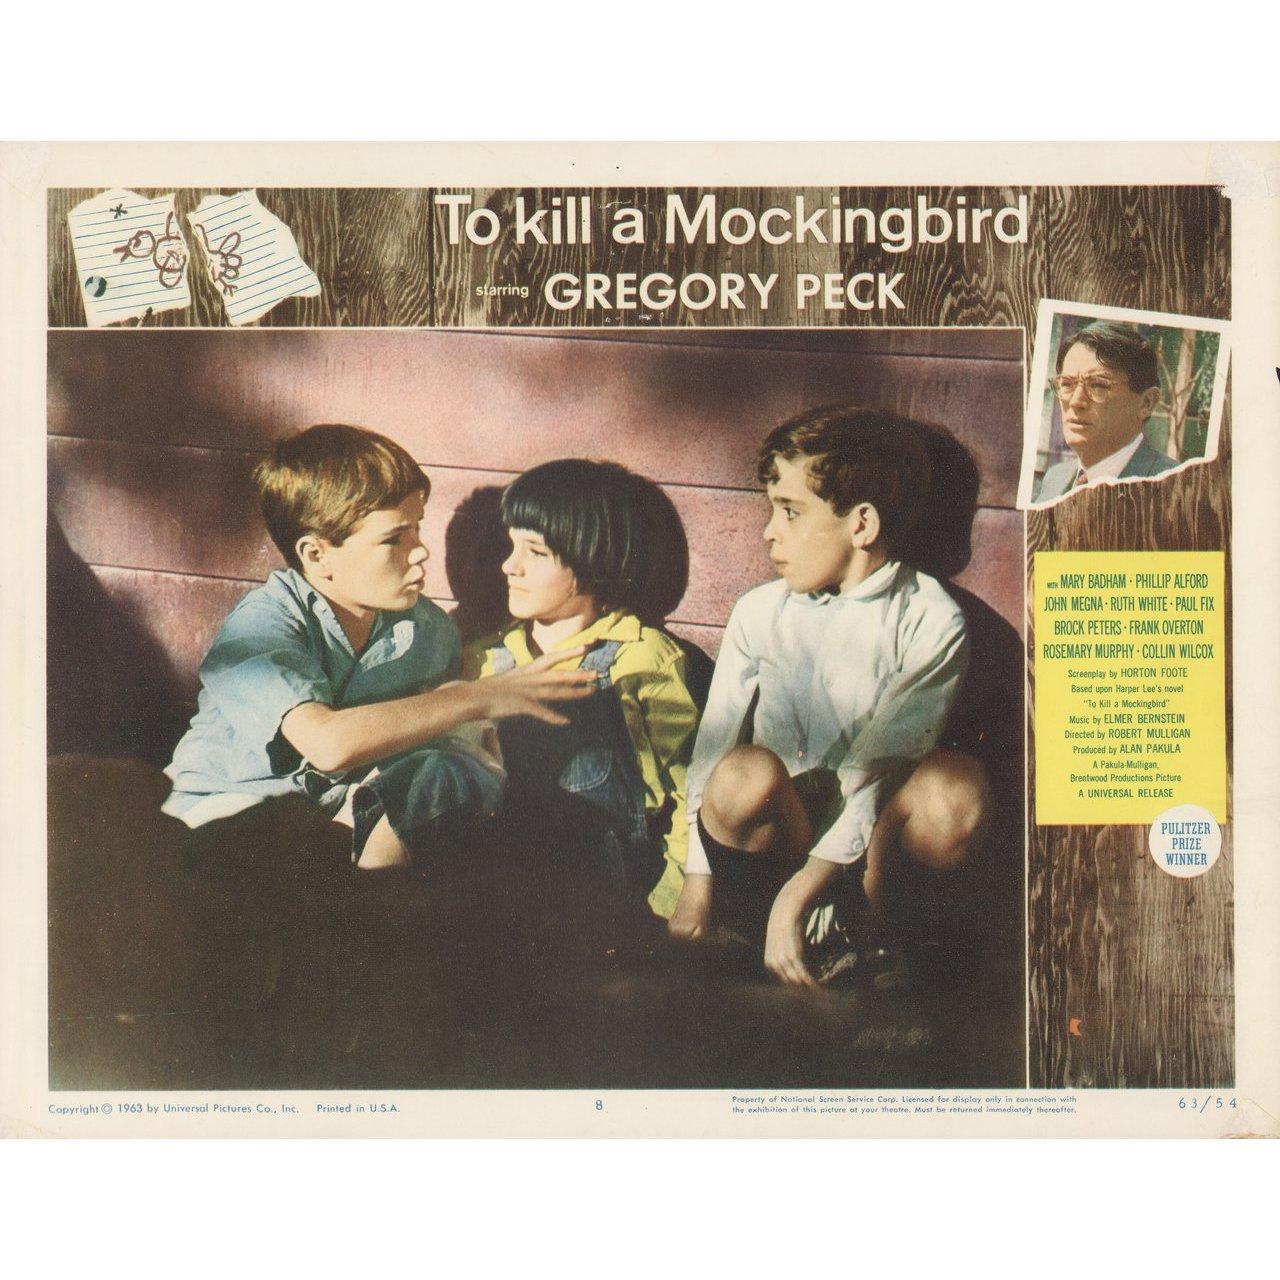 Original 1963 U.S. scene card for the film To Kill a Mockingbird directed by Robert Mulligan with Gregory Peck / John Megna / Frank Overton / Rosemary Murphy. Very Good-Fine condition, pinholes. Please note: the size is stated in inches and the